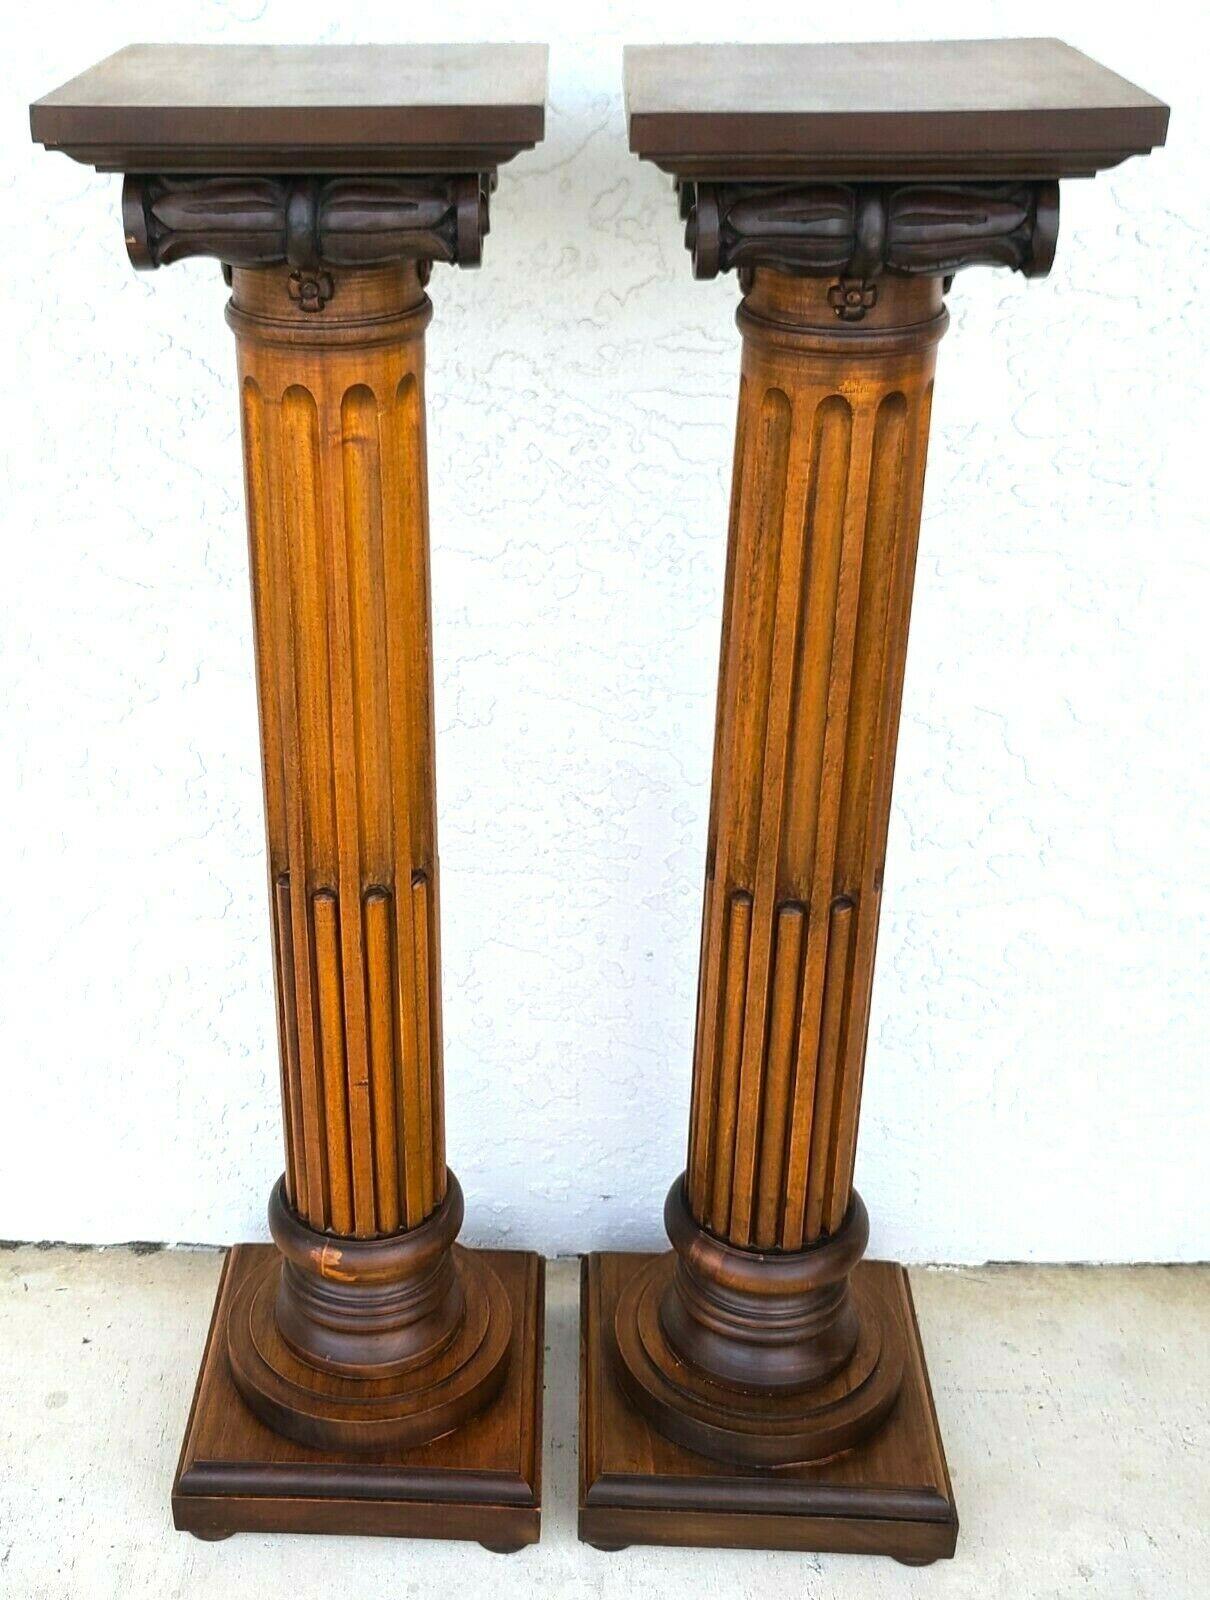 Walnut Pedestal Display Stands by Decorative Crafts Italy 2